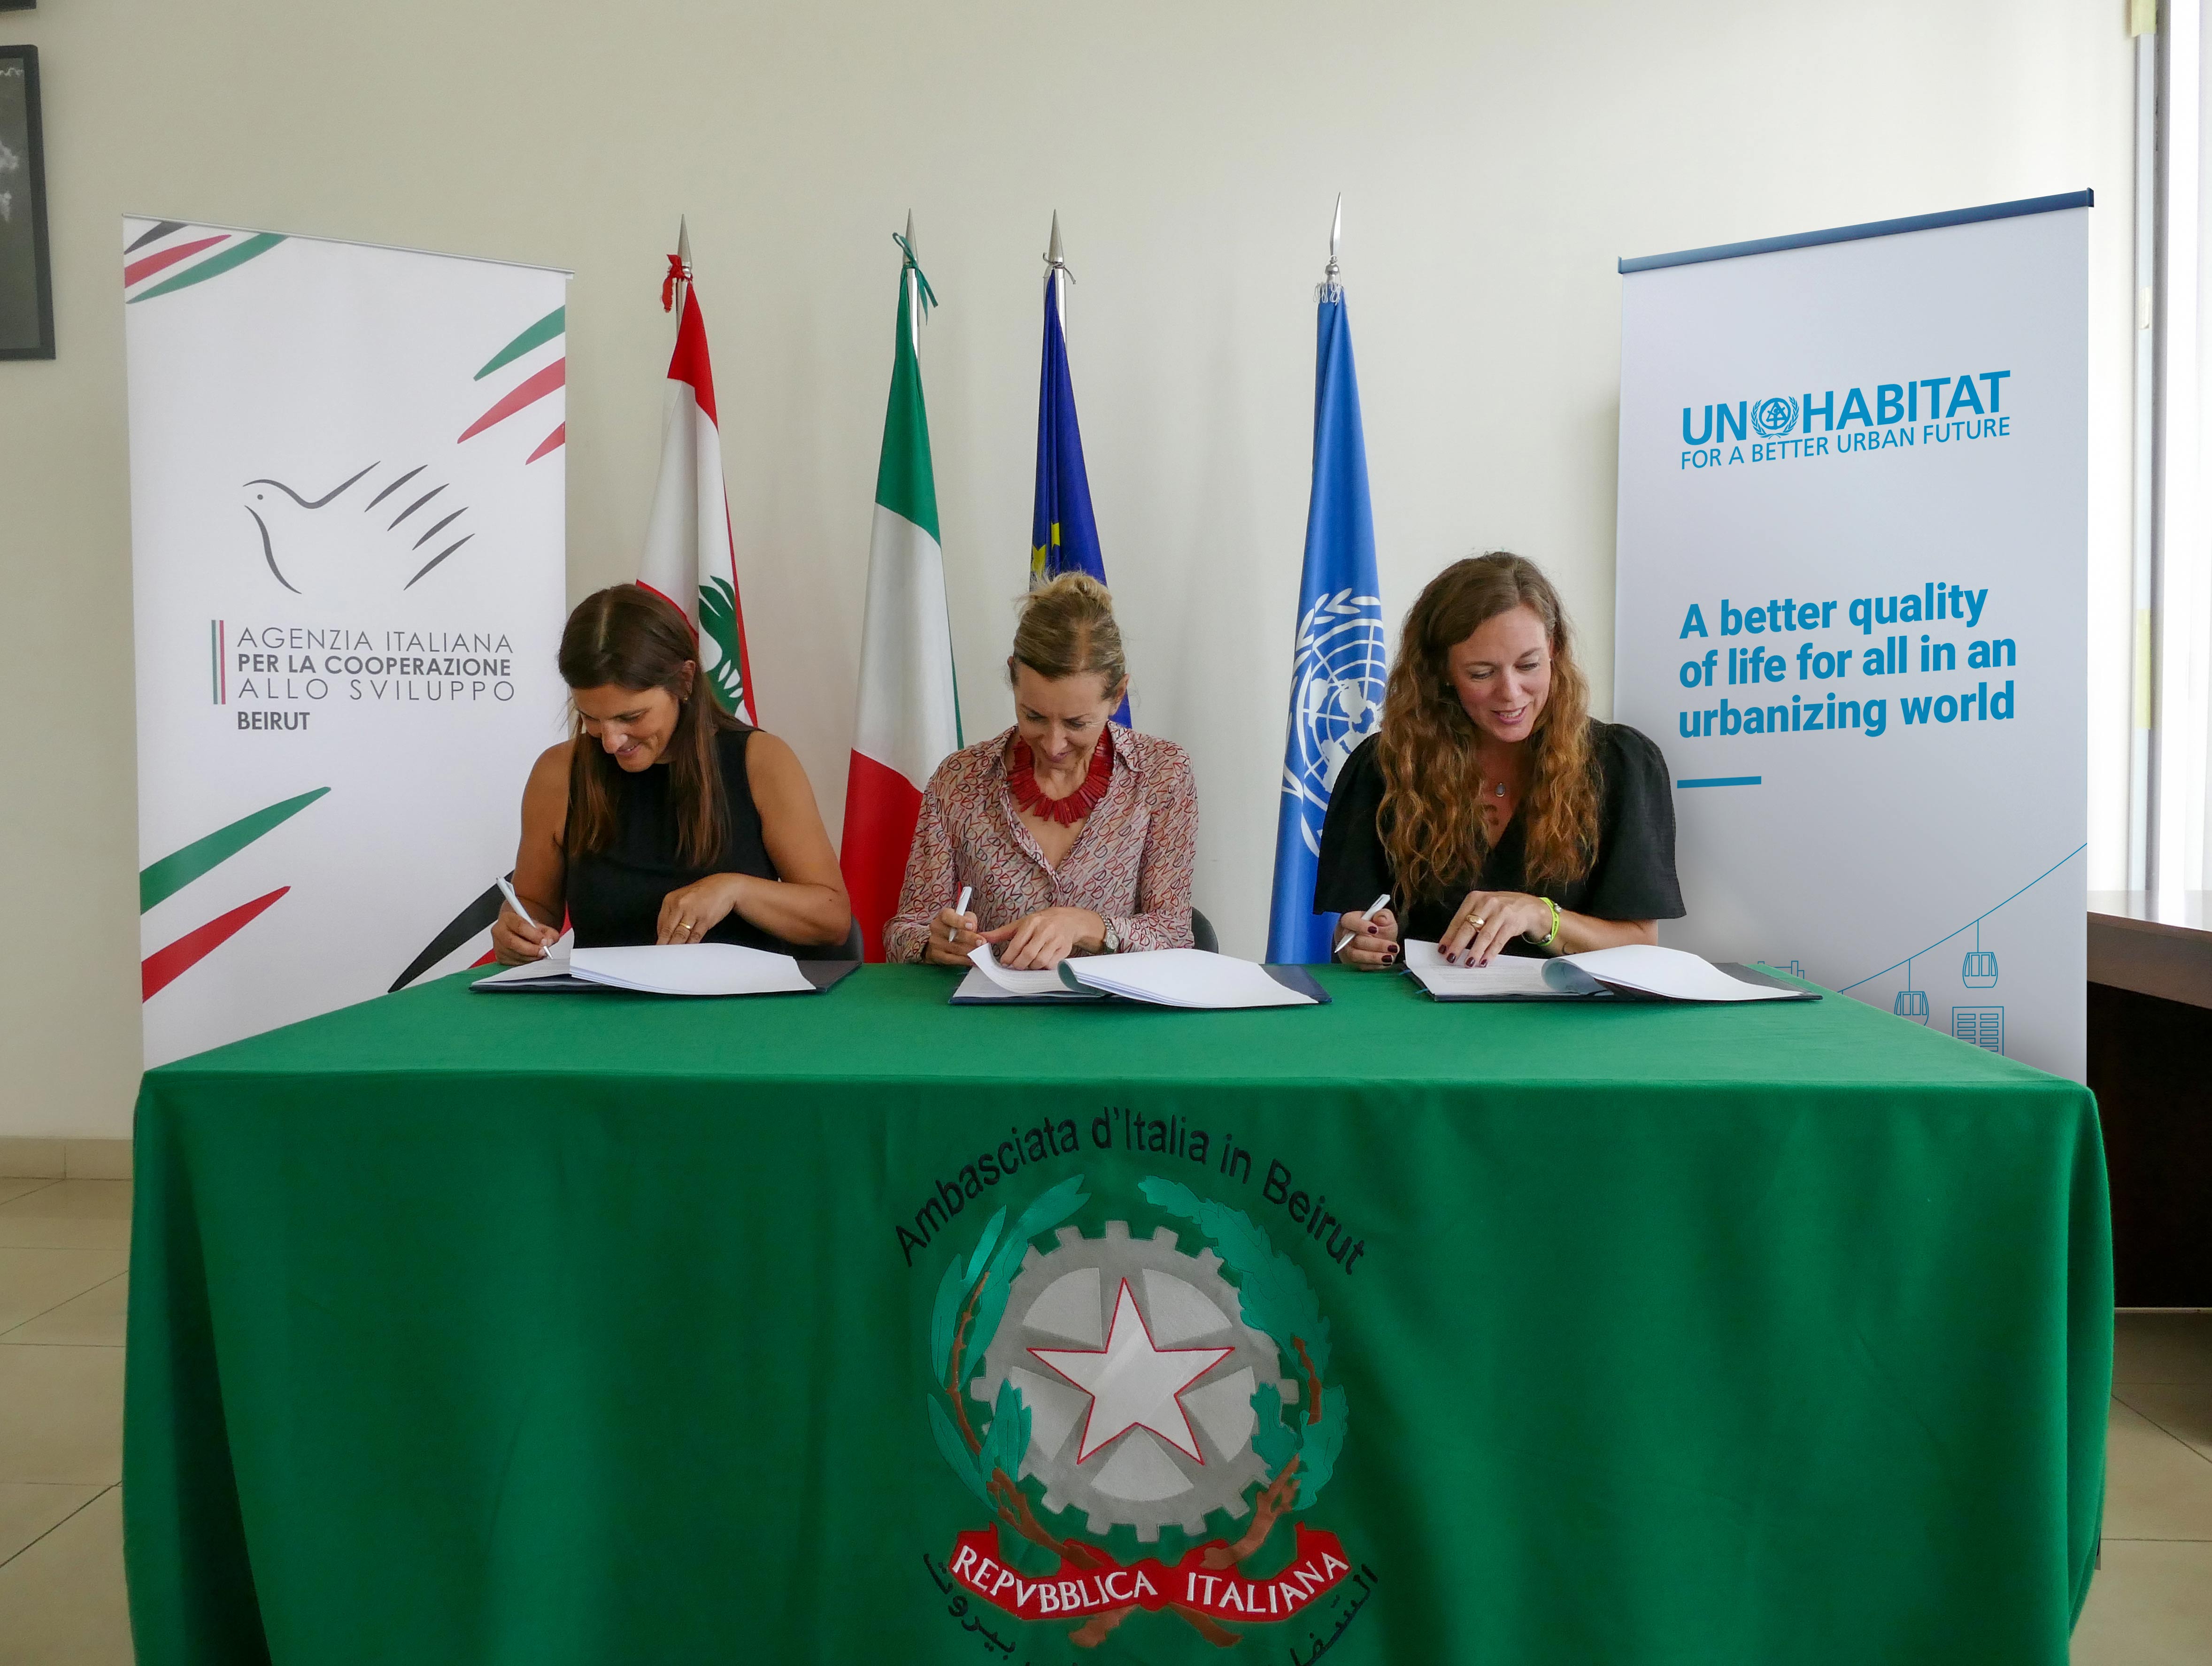 UN-Habitat and Italy sign a €2.3m project to rehabilitate public spaces within the Mar Mikhael train station and restore housing units in Beirut.” UN-Habitat Lebanon, 2022